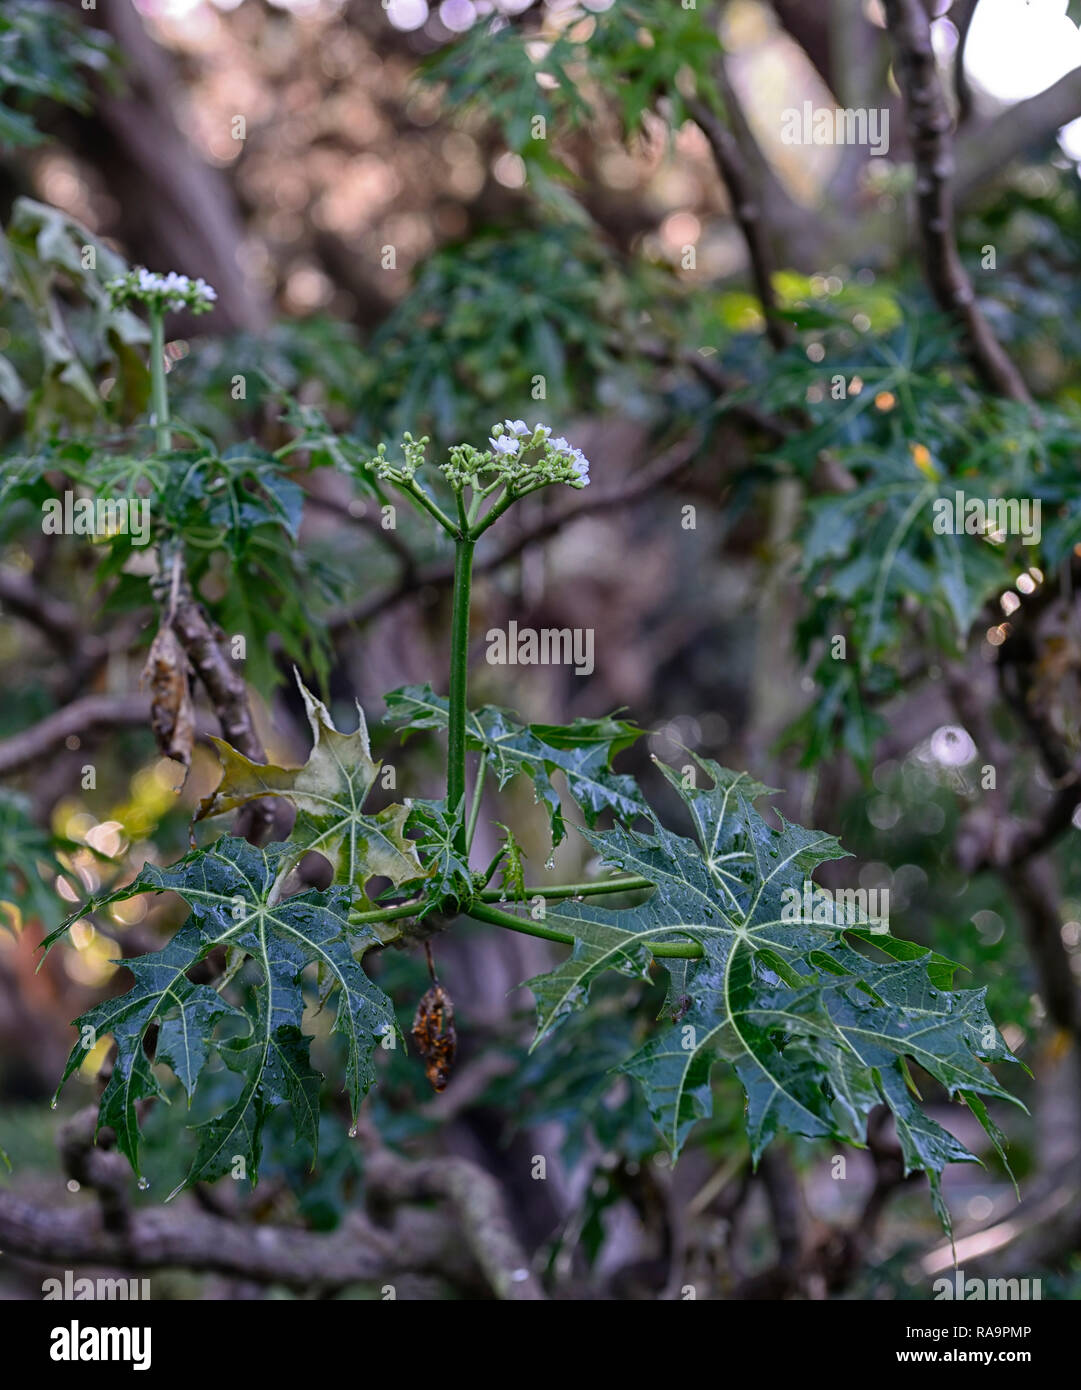 Cnidoscolus aconitifolius,chaya,tree spinach,Tread Softly,Cabbage Star,leaves,foliage,medicinal,edible,poisonous,RM Floral Stock Photo